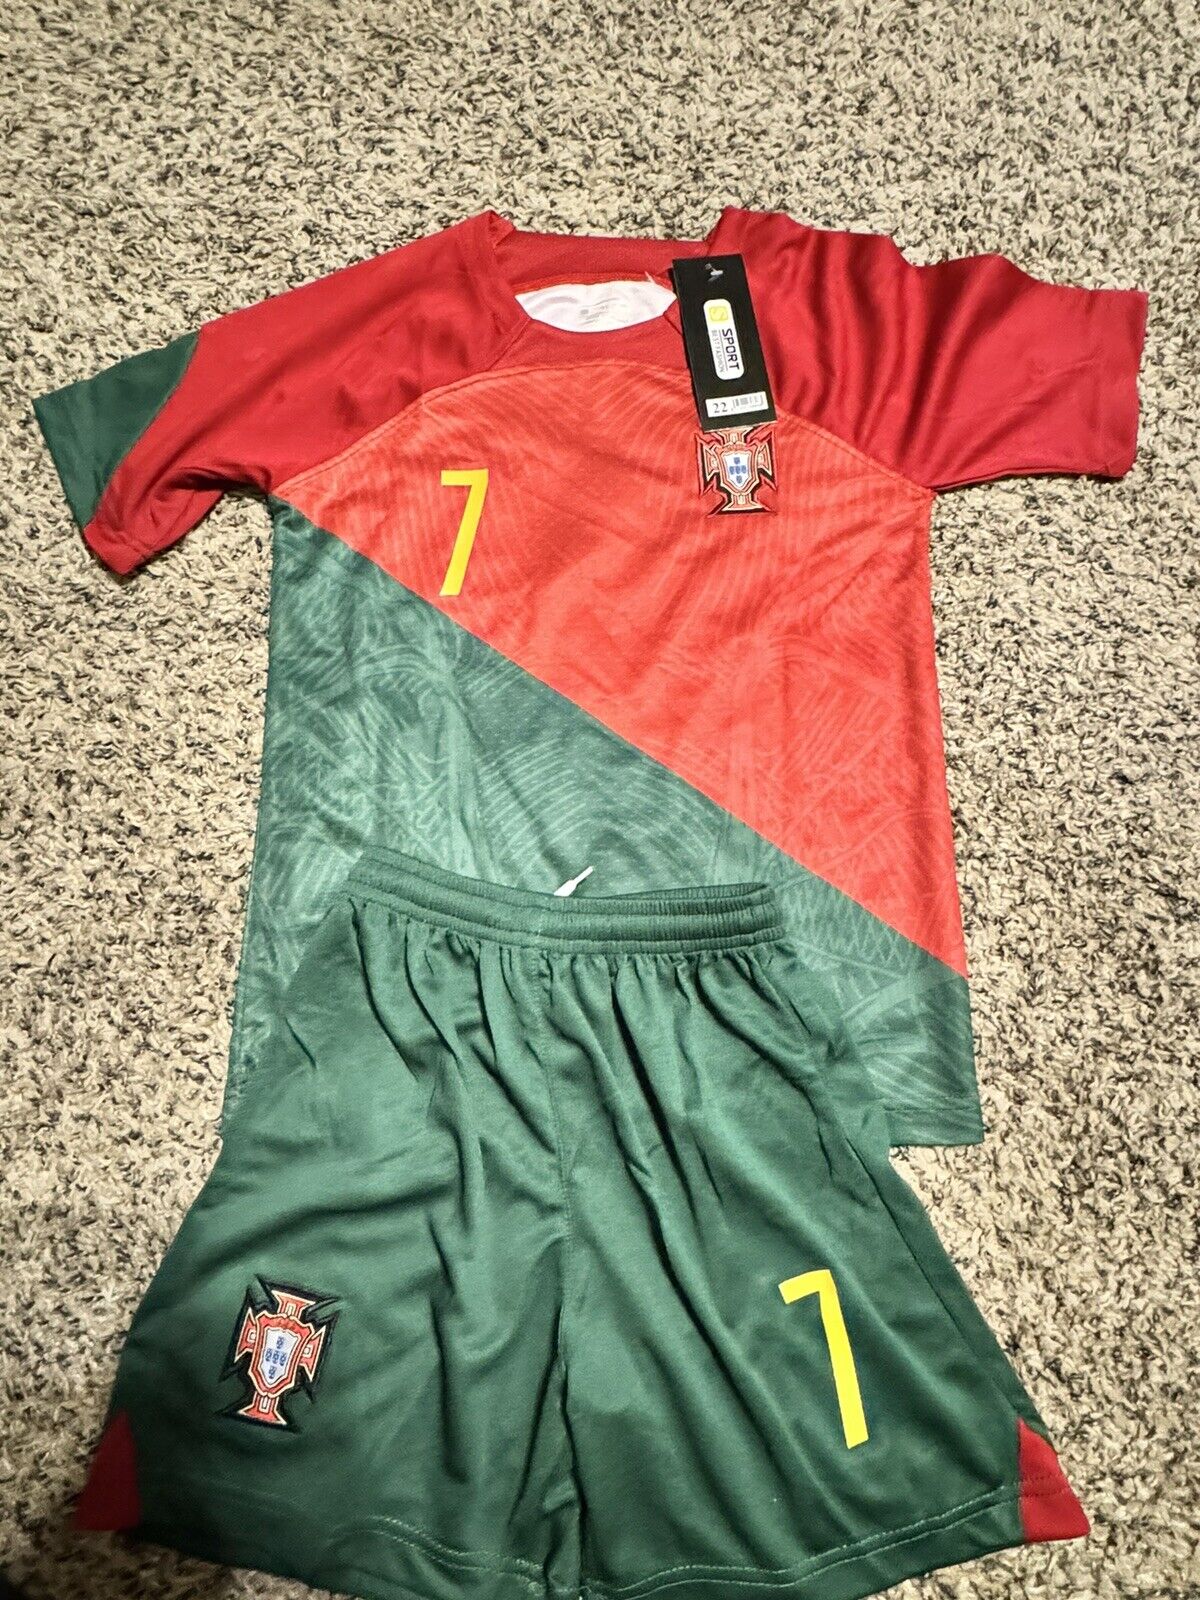 Portugal World Cup Ronaldo #7 Soccer Jersey and Shorts  Kids size 22 /6-7yr Old